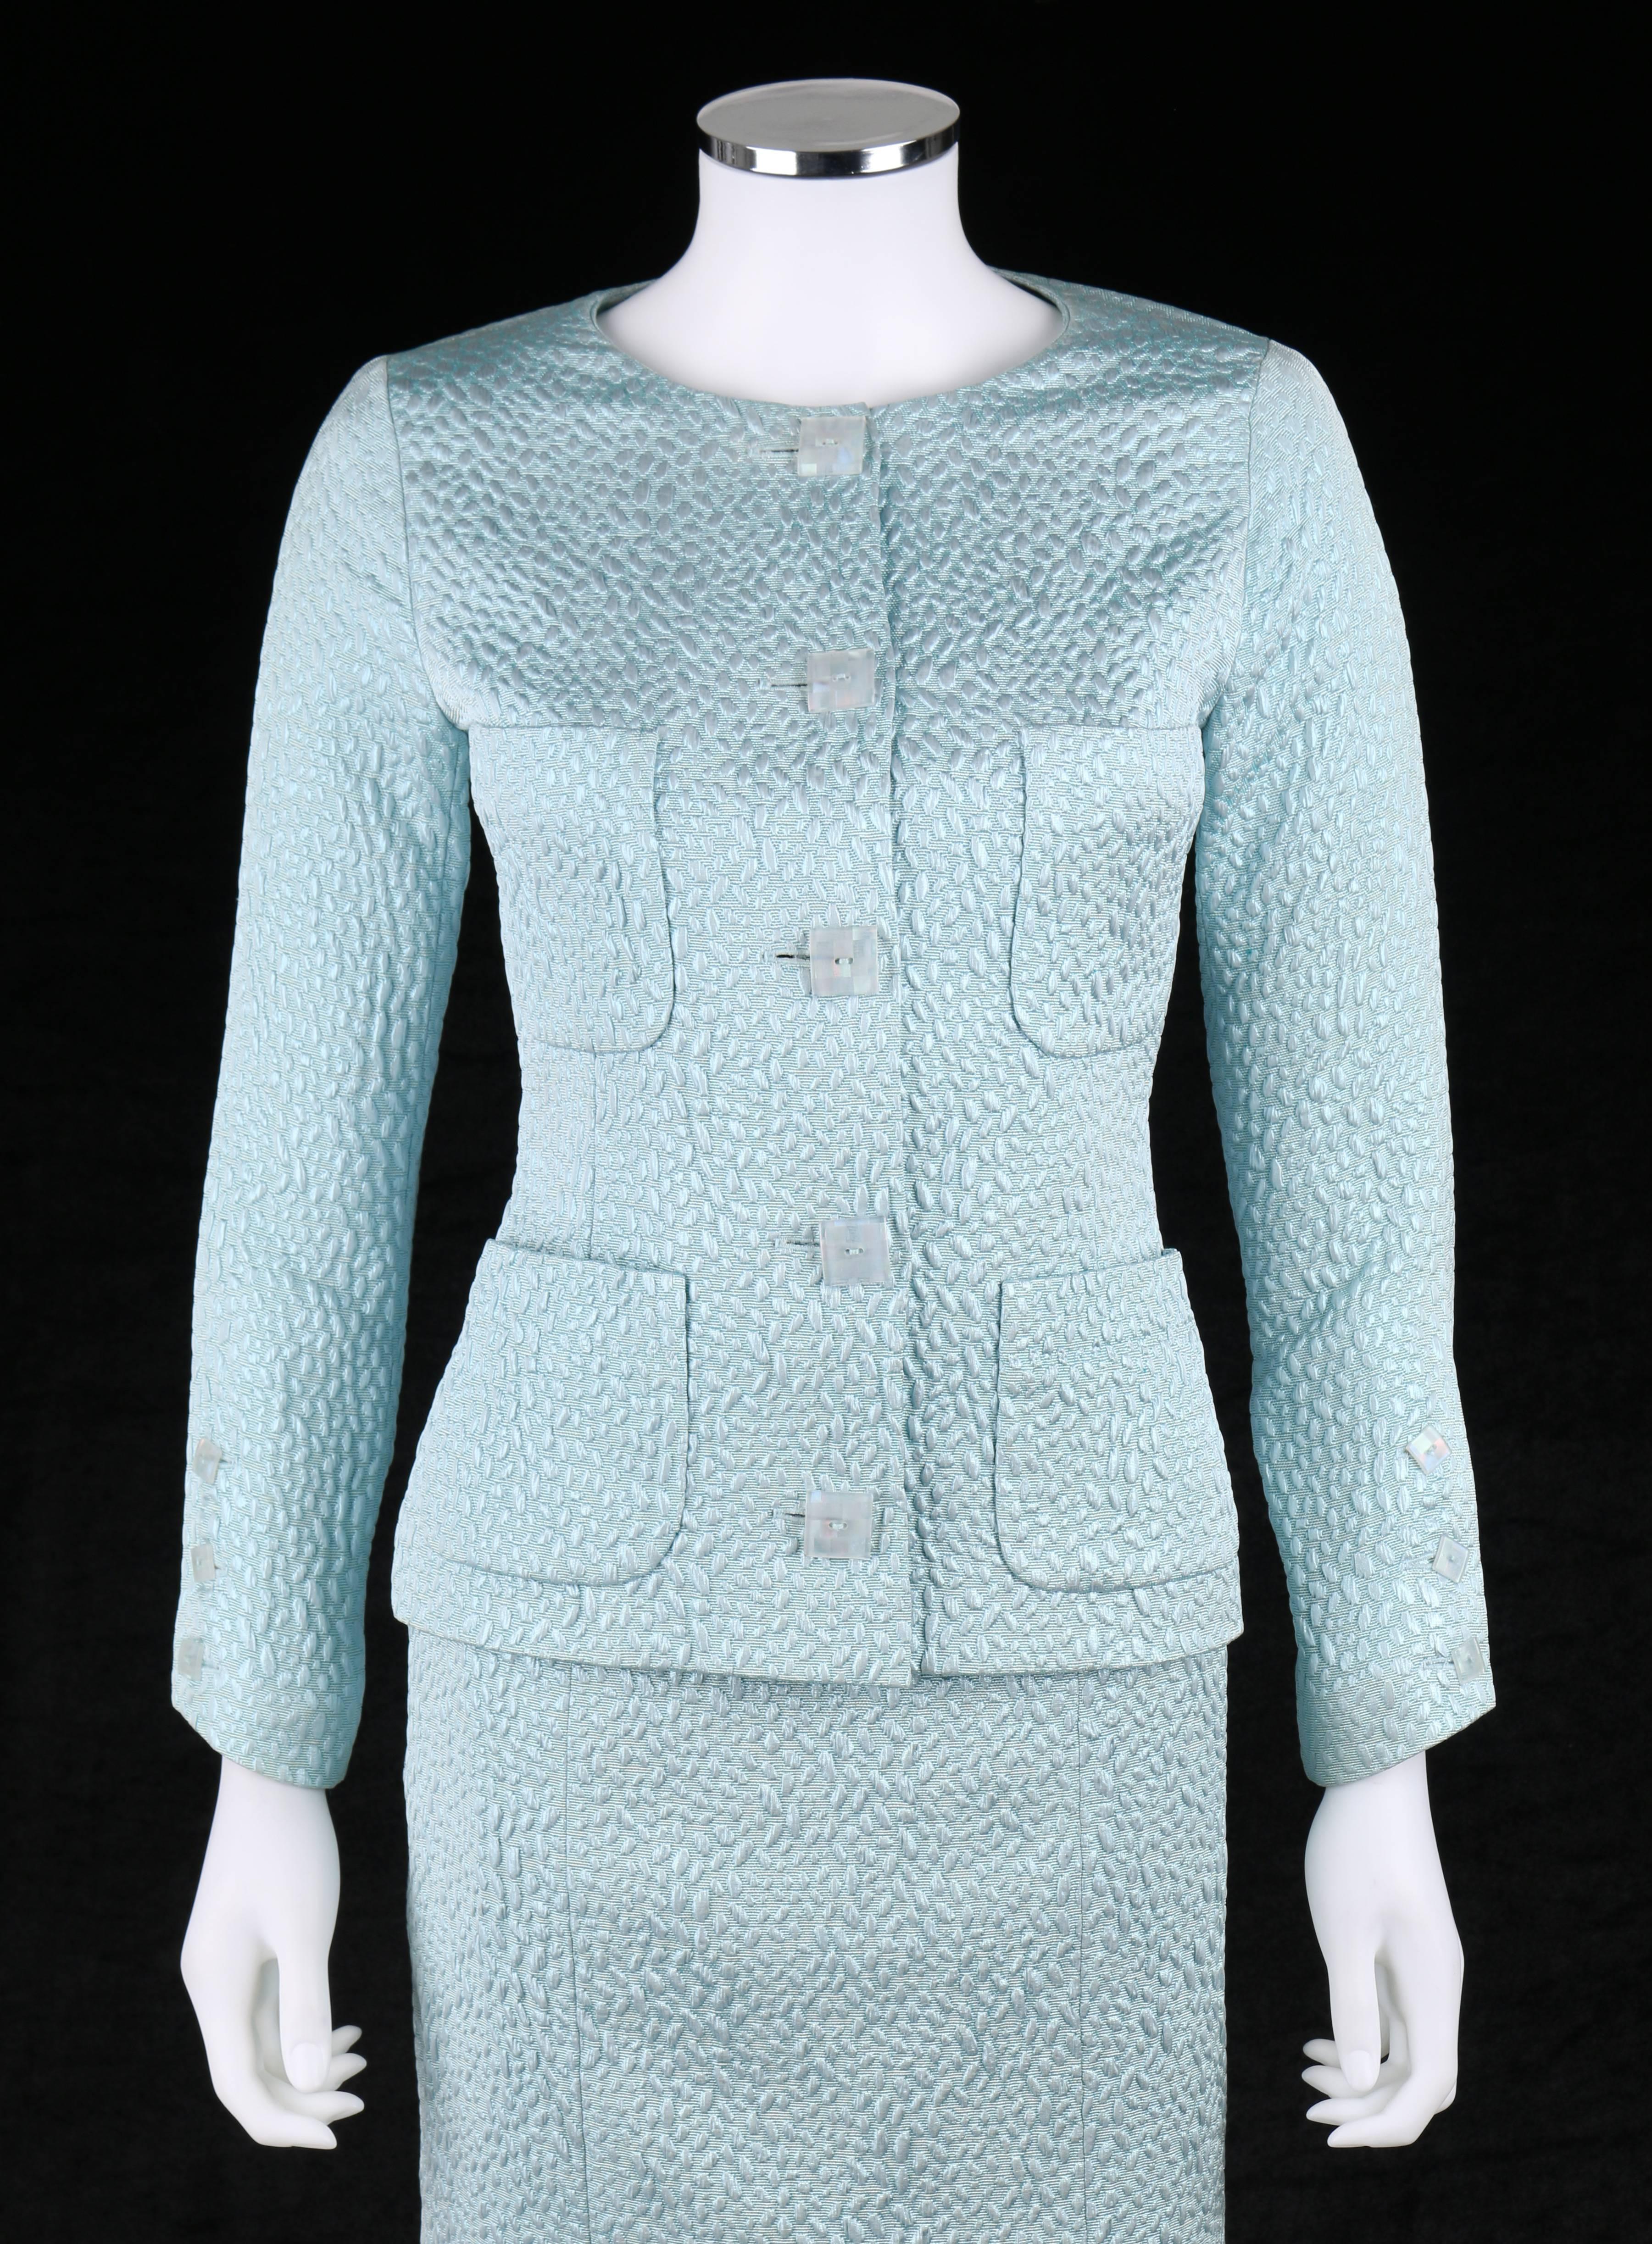 Vintage Chanel Boutique c.1980's light blue metallic skirt suit. Light blue metallic abstract oval matelasse fabric. Long sleeve jacket with three pearlized square button closures at cuff. Five center front button closures. Four front rounded patch